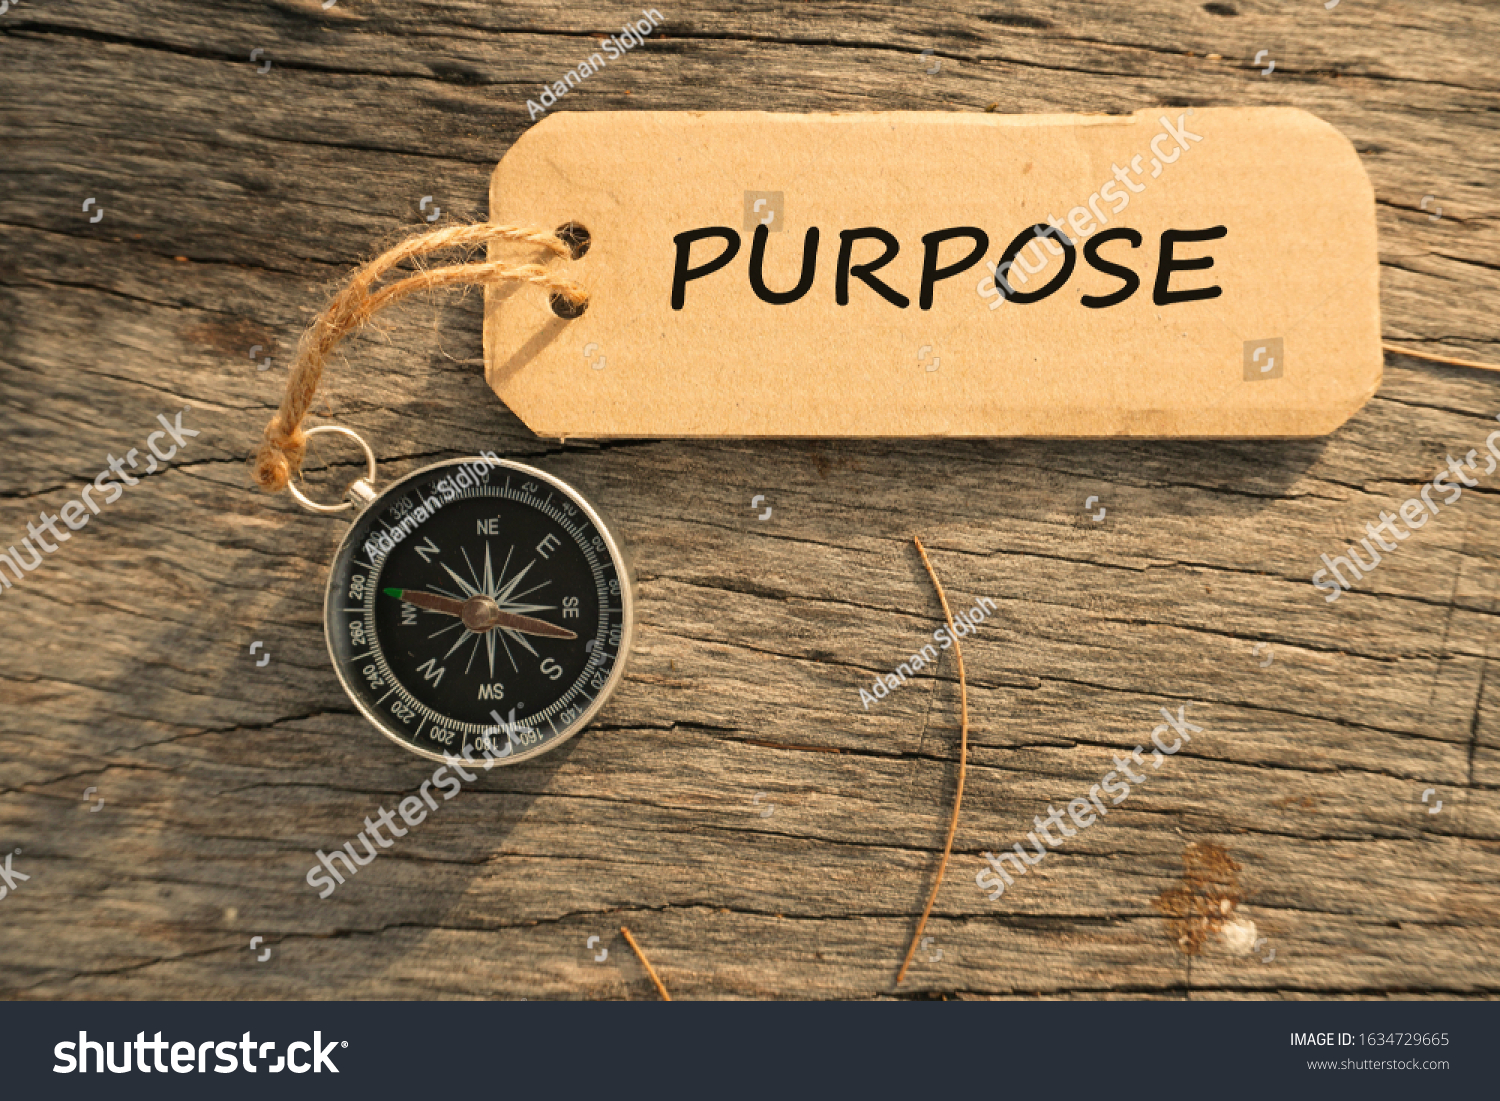 Magnetic compass and text PURPOSE written on paper tag at outdoor. Conceptual image with selective focus #1634729665